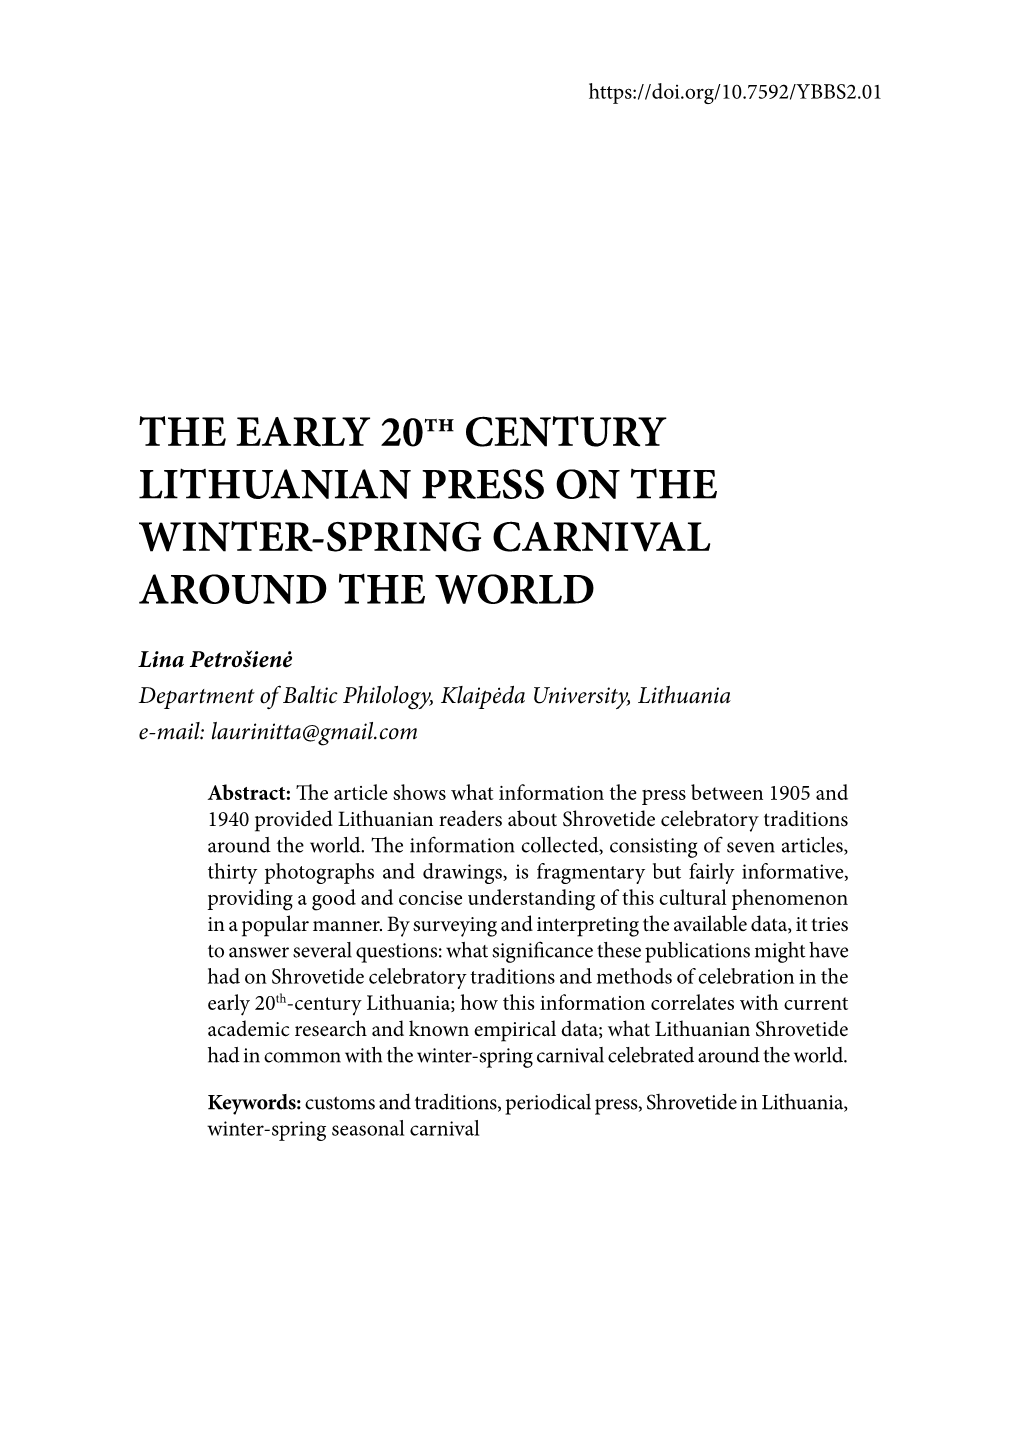 THE EARLY 20Th CENTURY LITHUANIAN PRESS on the WINTER-SPRING CARNIVAL AROUND the WORLD